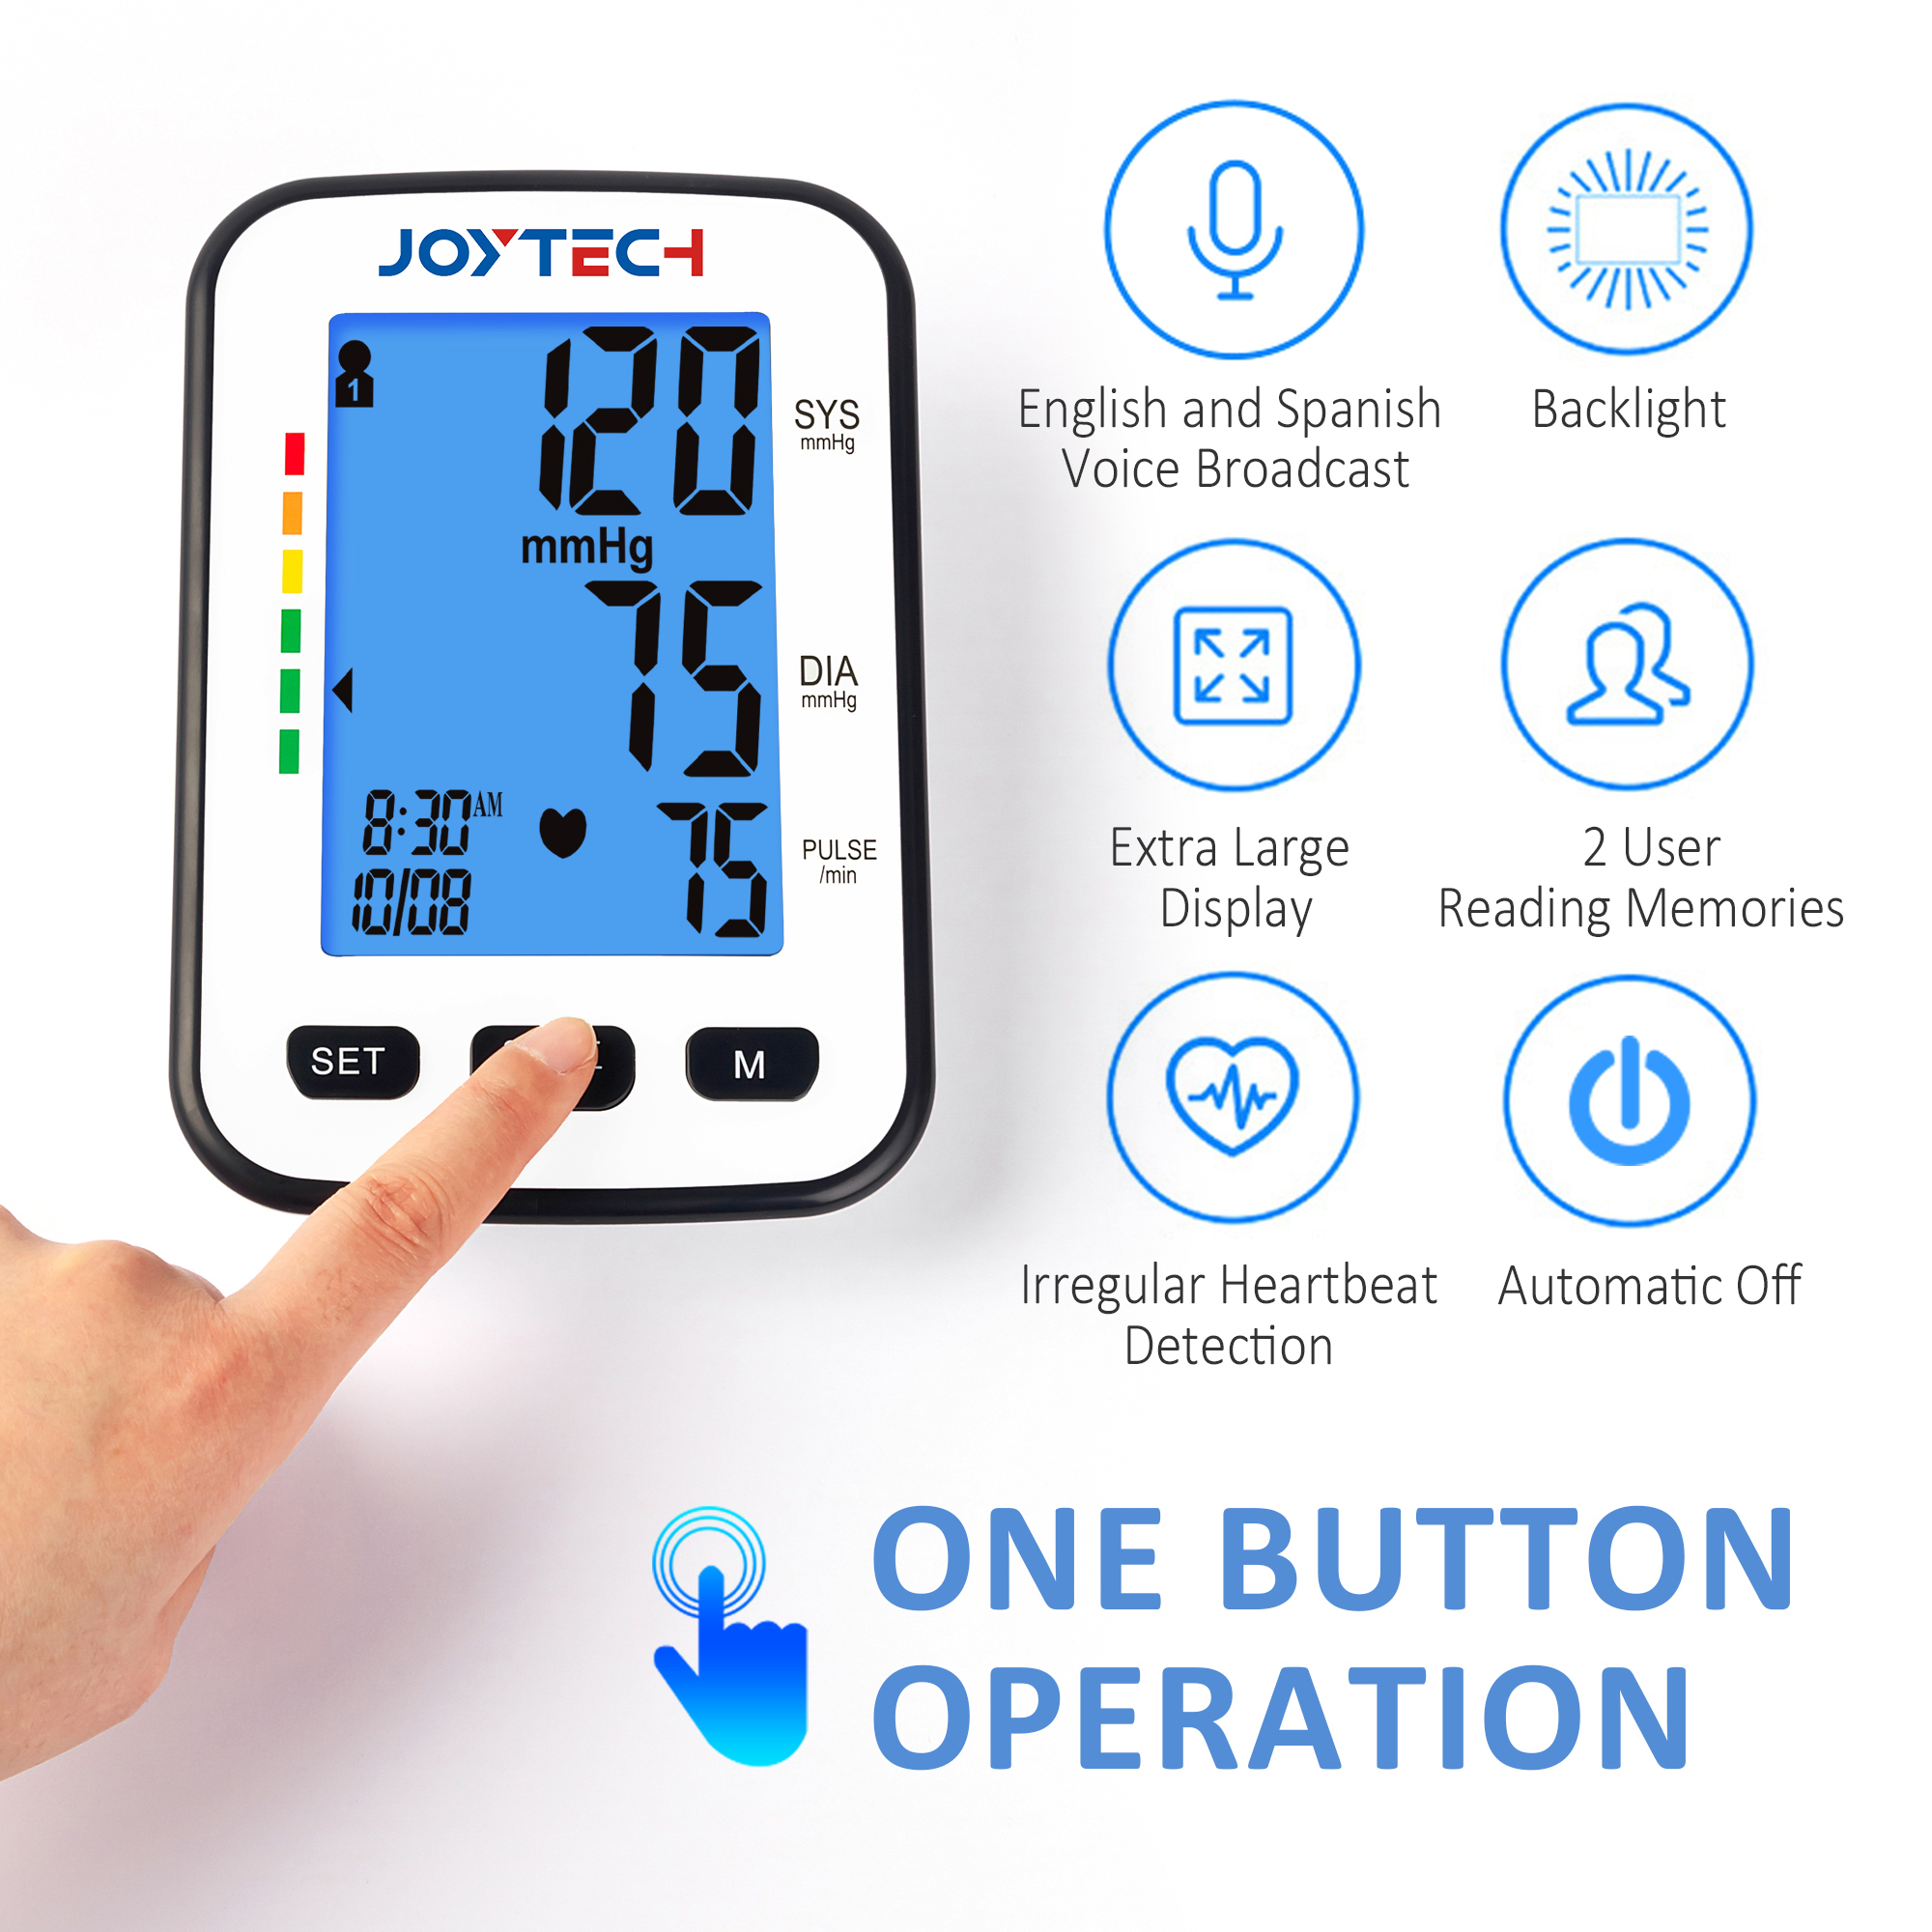 How to set time and date on Joytech DBP-1333 blood pressure monitor